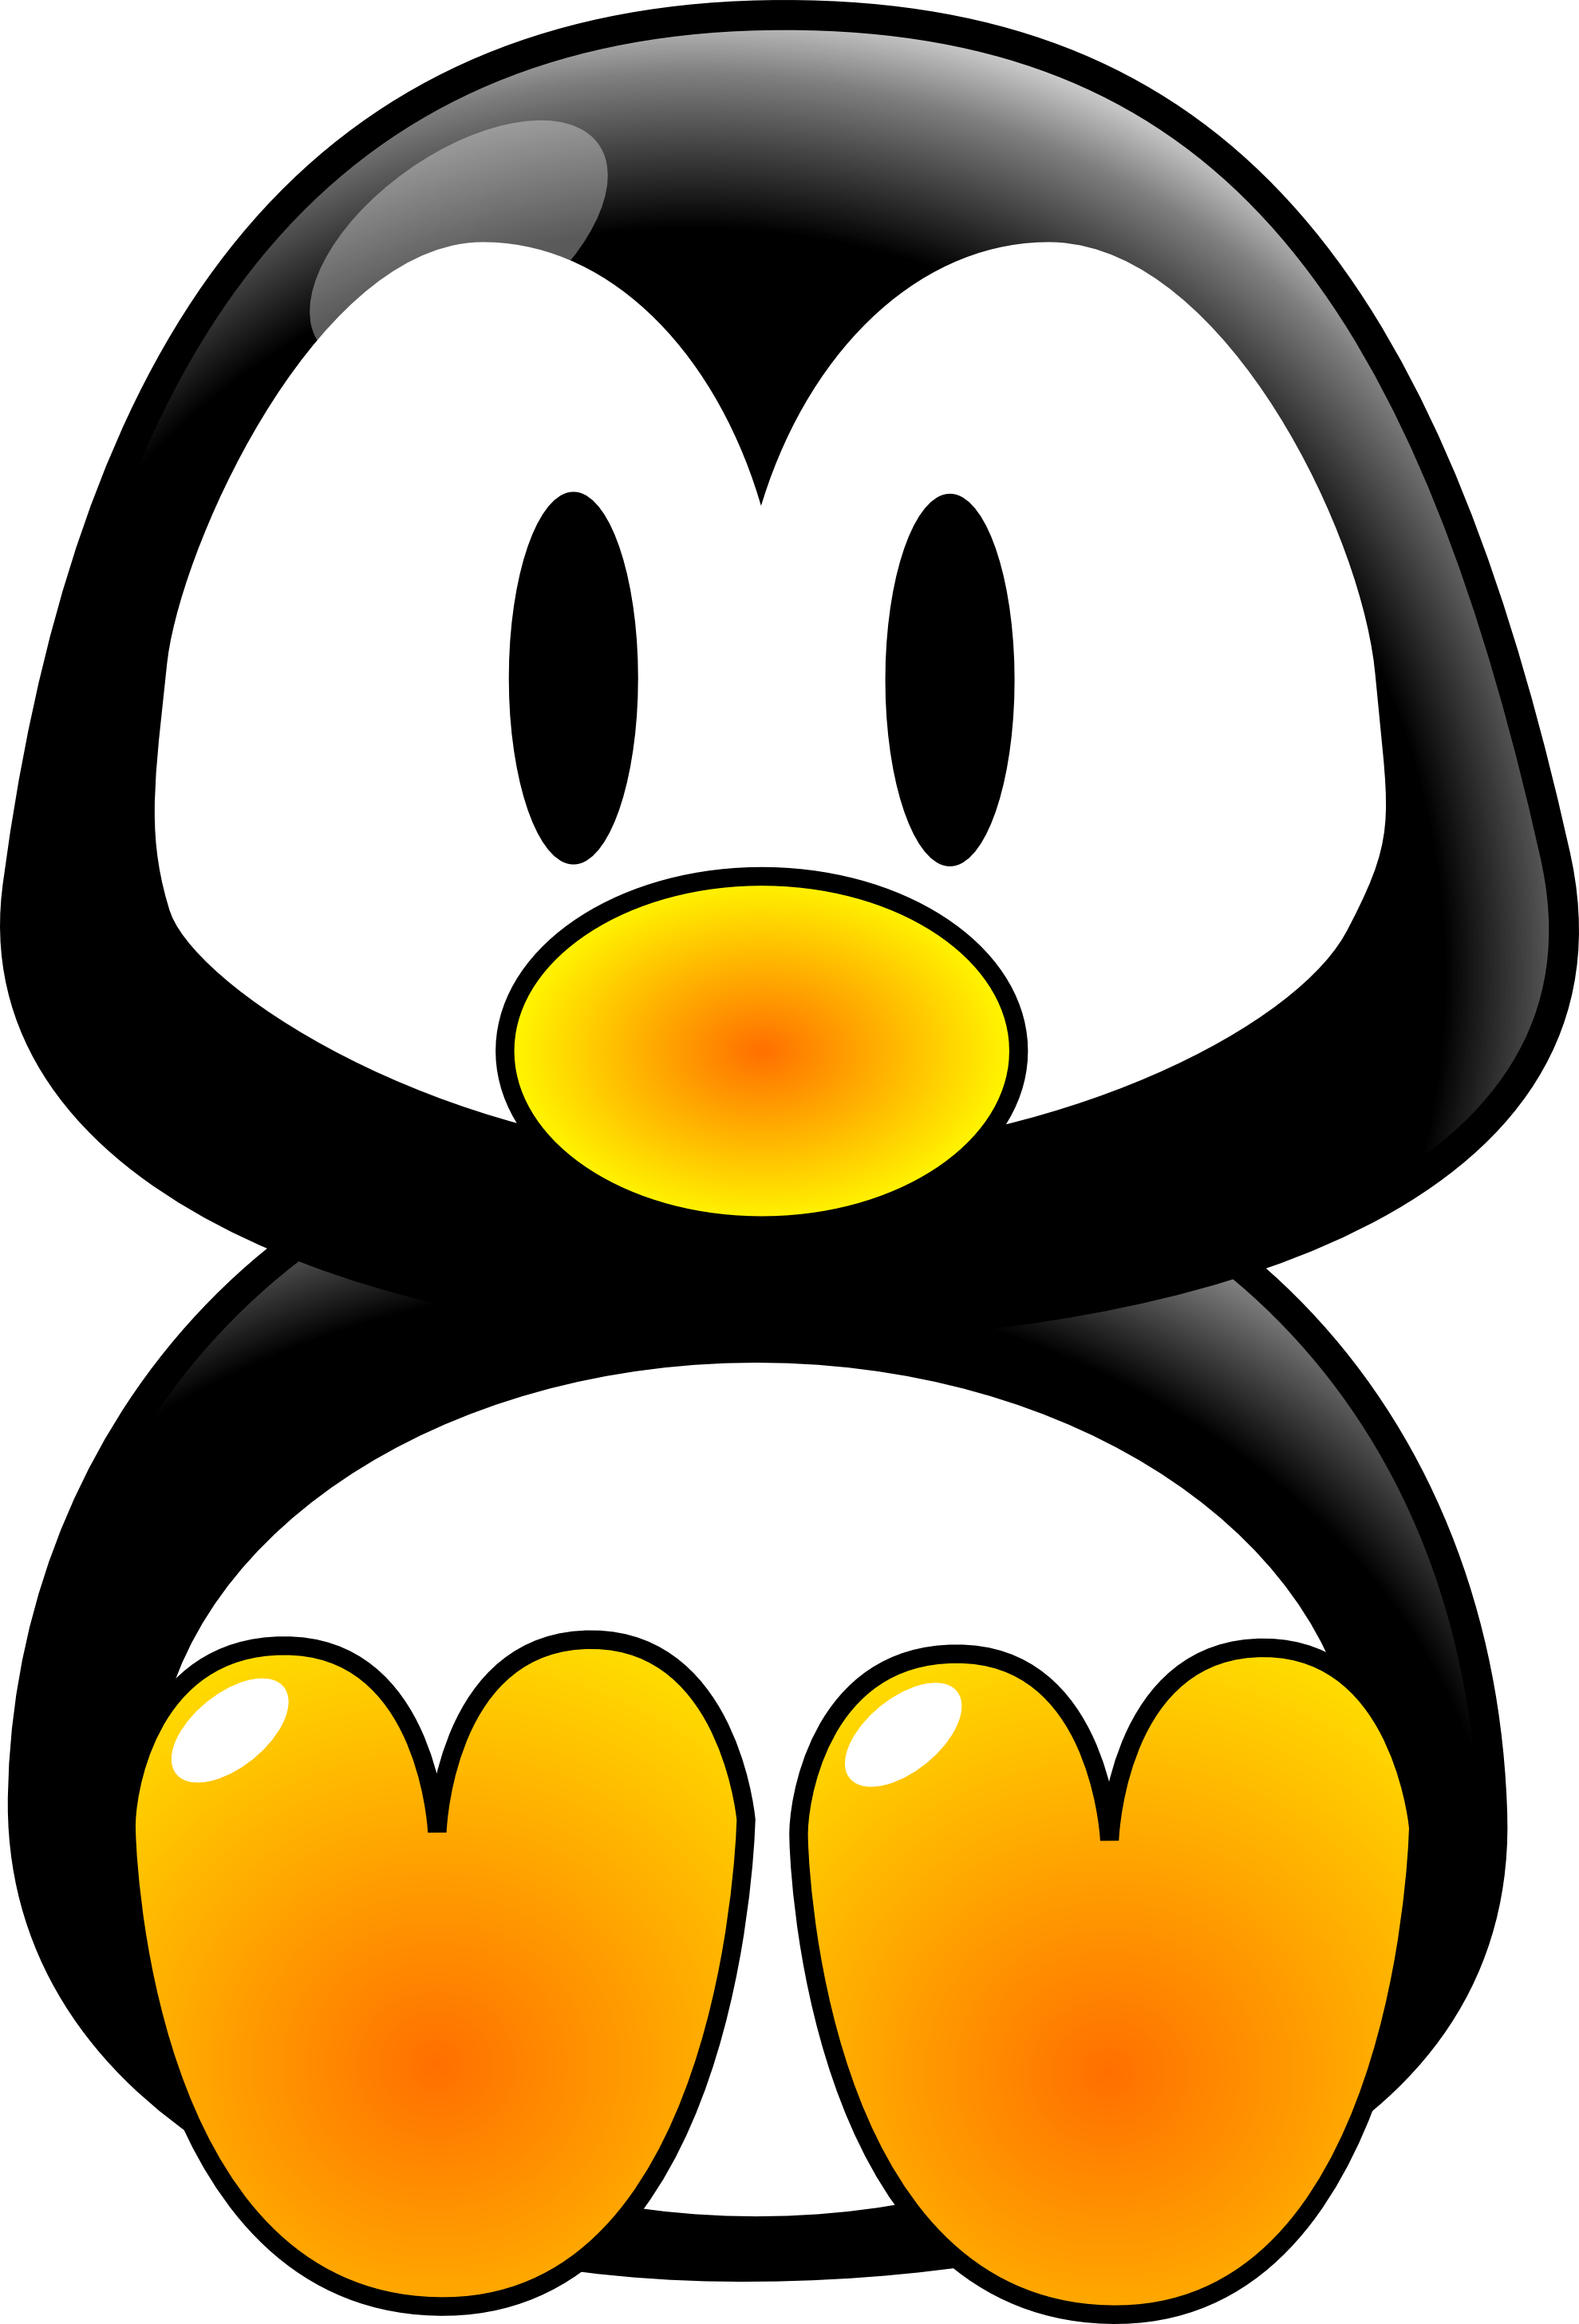 Clip Art: chovynz baby tux linux scallywag March ... - ClipArt ...